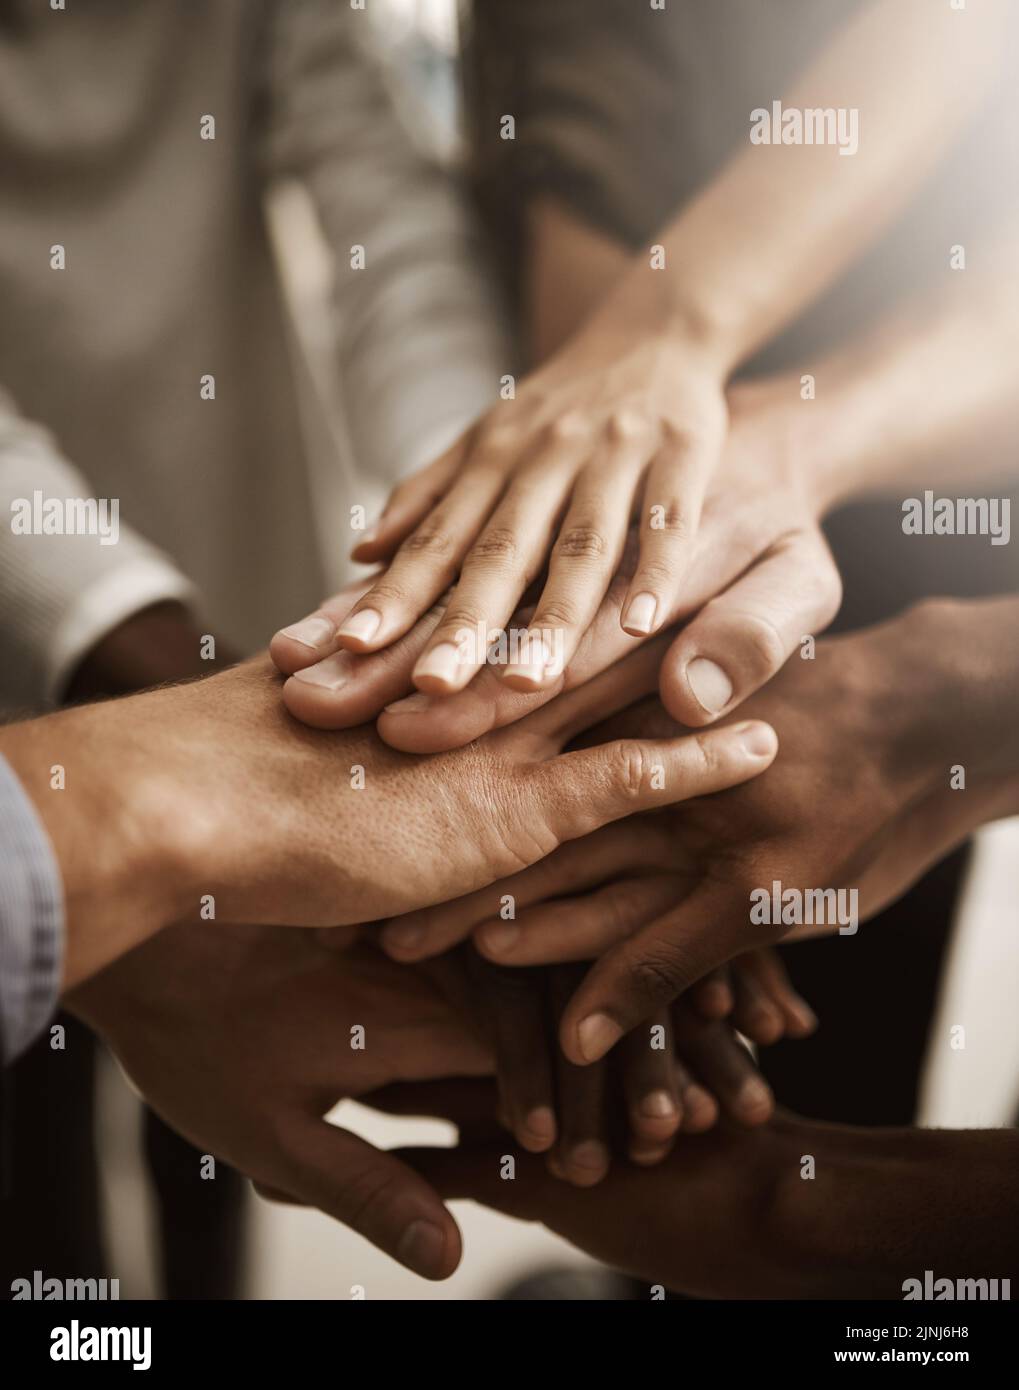 Hands, teamwork and support with a group or team of people showing togetherness, unity and solidarity in a gesture of working together, trust and Stock Photo